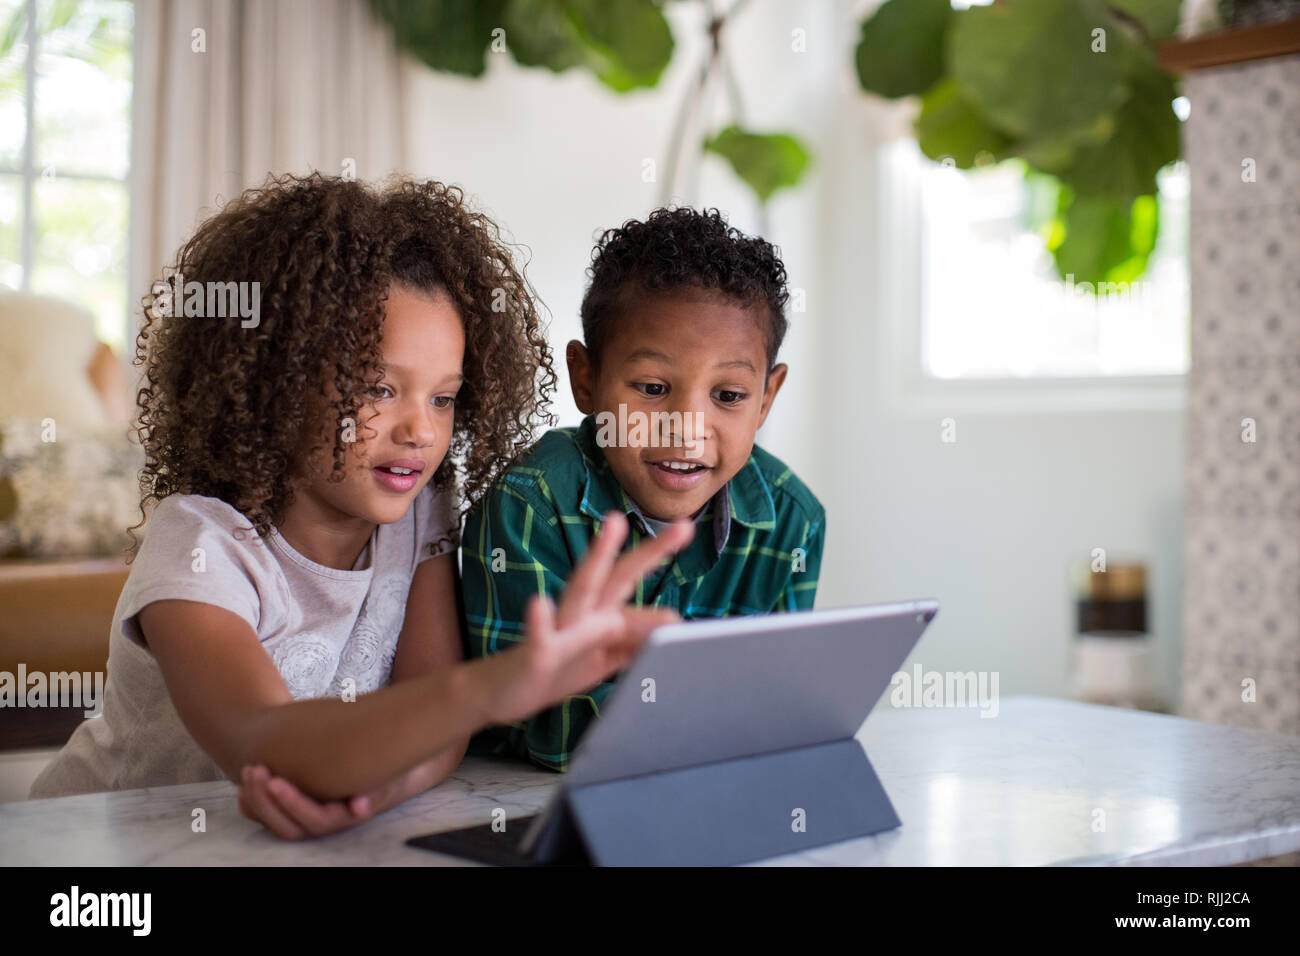 African American brother and sister playing together on digital tablet Stock Photo